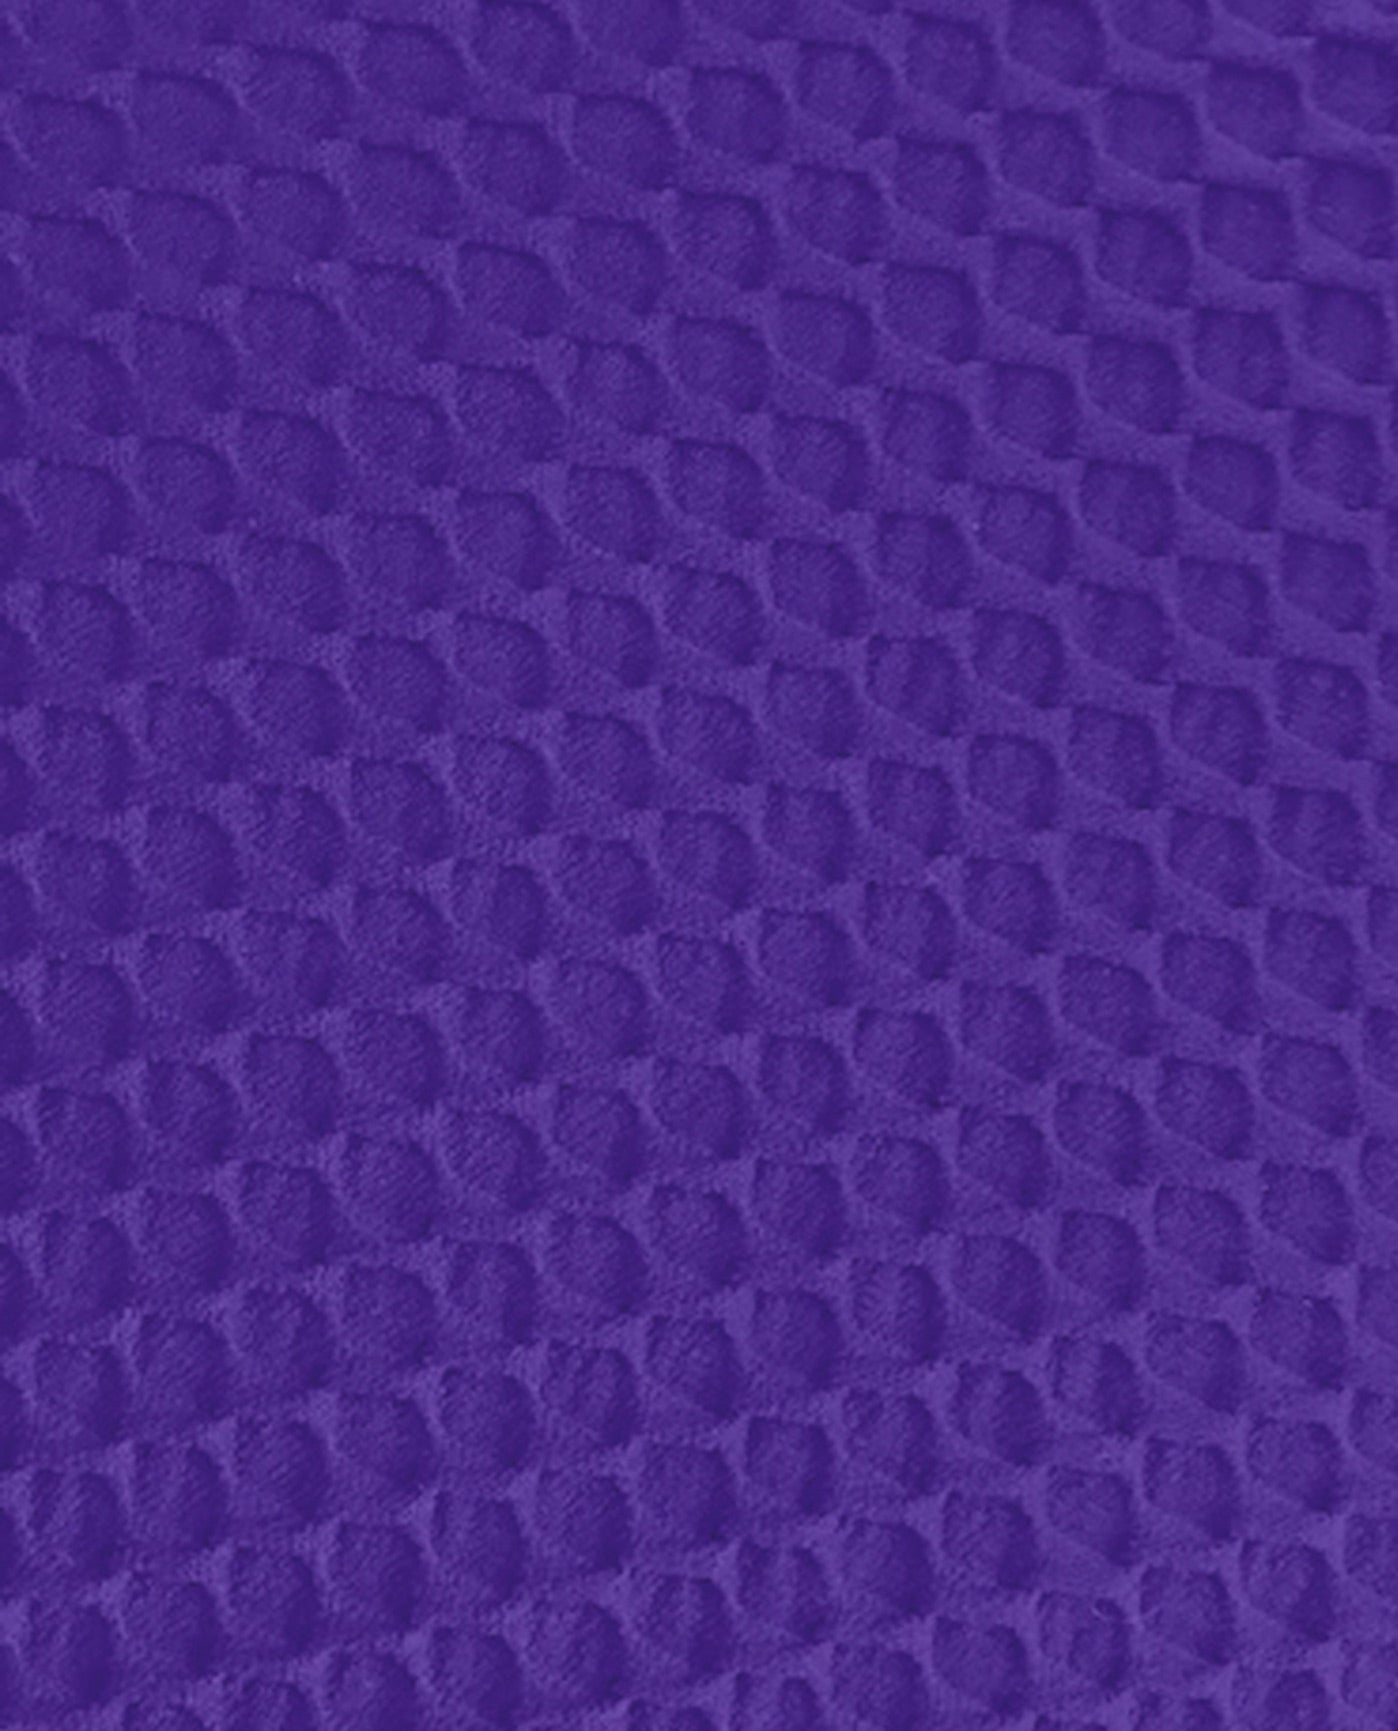 FABRIC SWATCH VIEW OF CHLORINE RESISTANT AQUAMORE SOLID TEXTURED SHIRRED FRONT PLUS SIZE SWIMSUIT | 510 AQT TEXTURED PURPLE